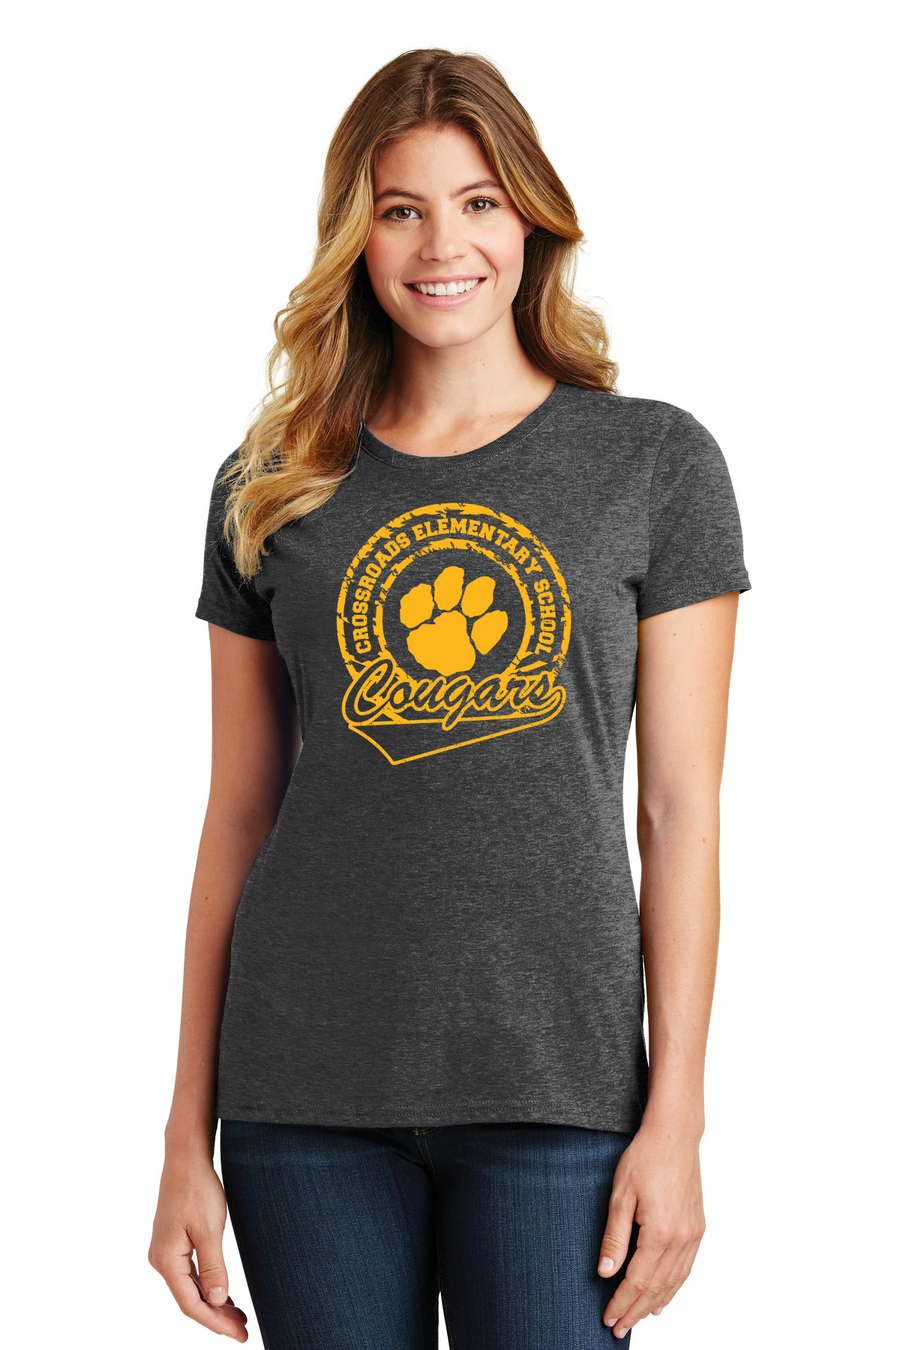 Crossroads Elementary Fall 23/24 On-Demand-Port and Co Ladies Favorite Shirt